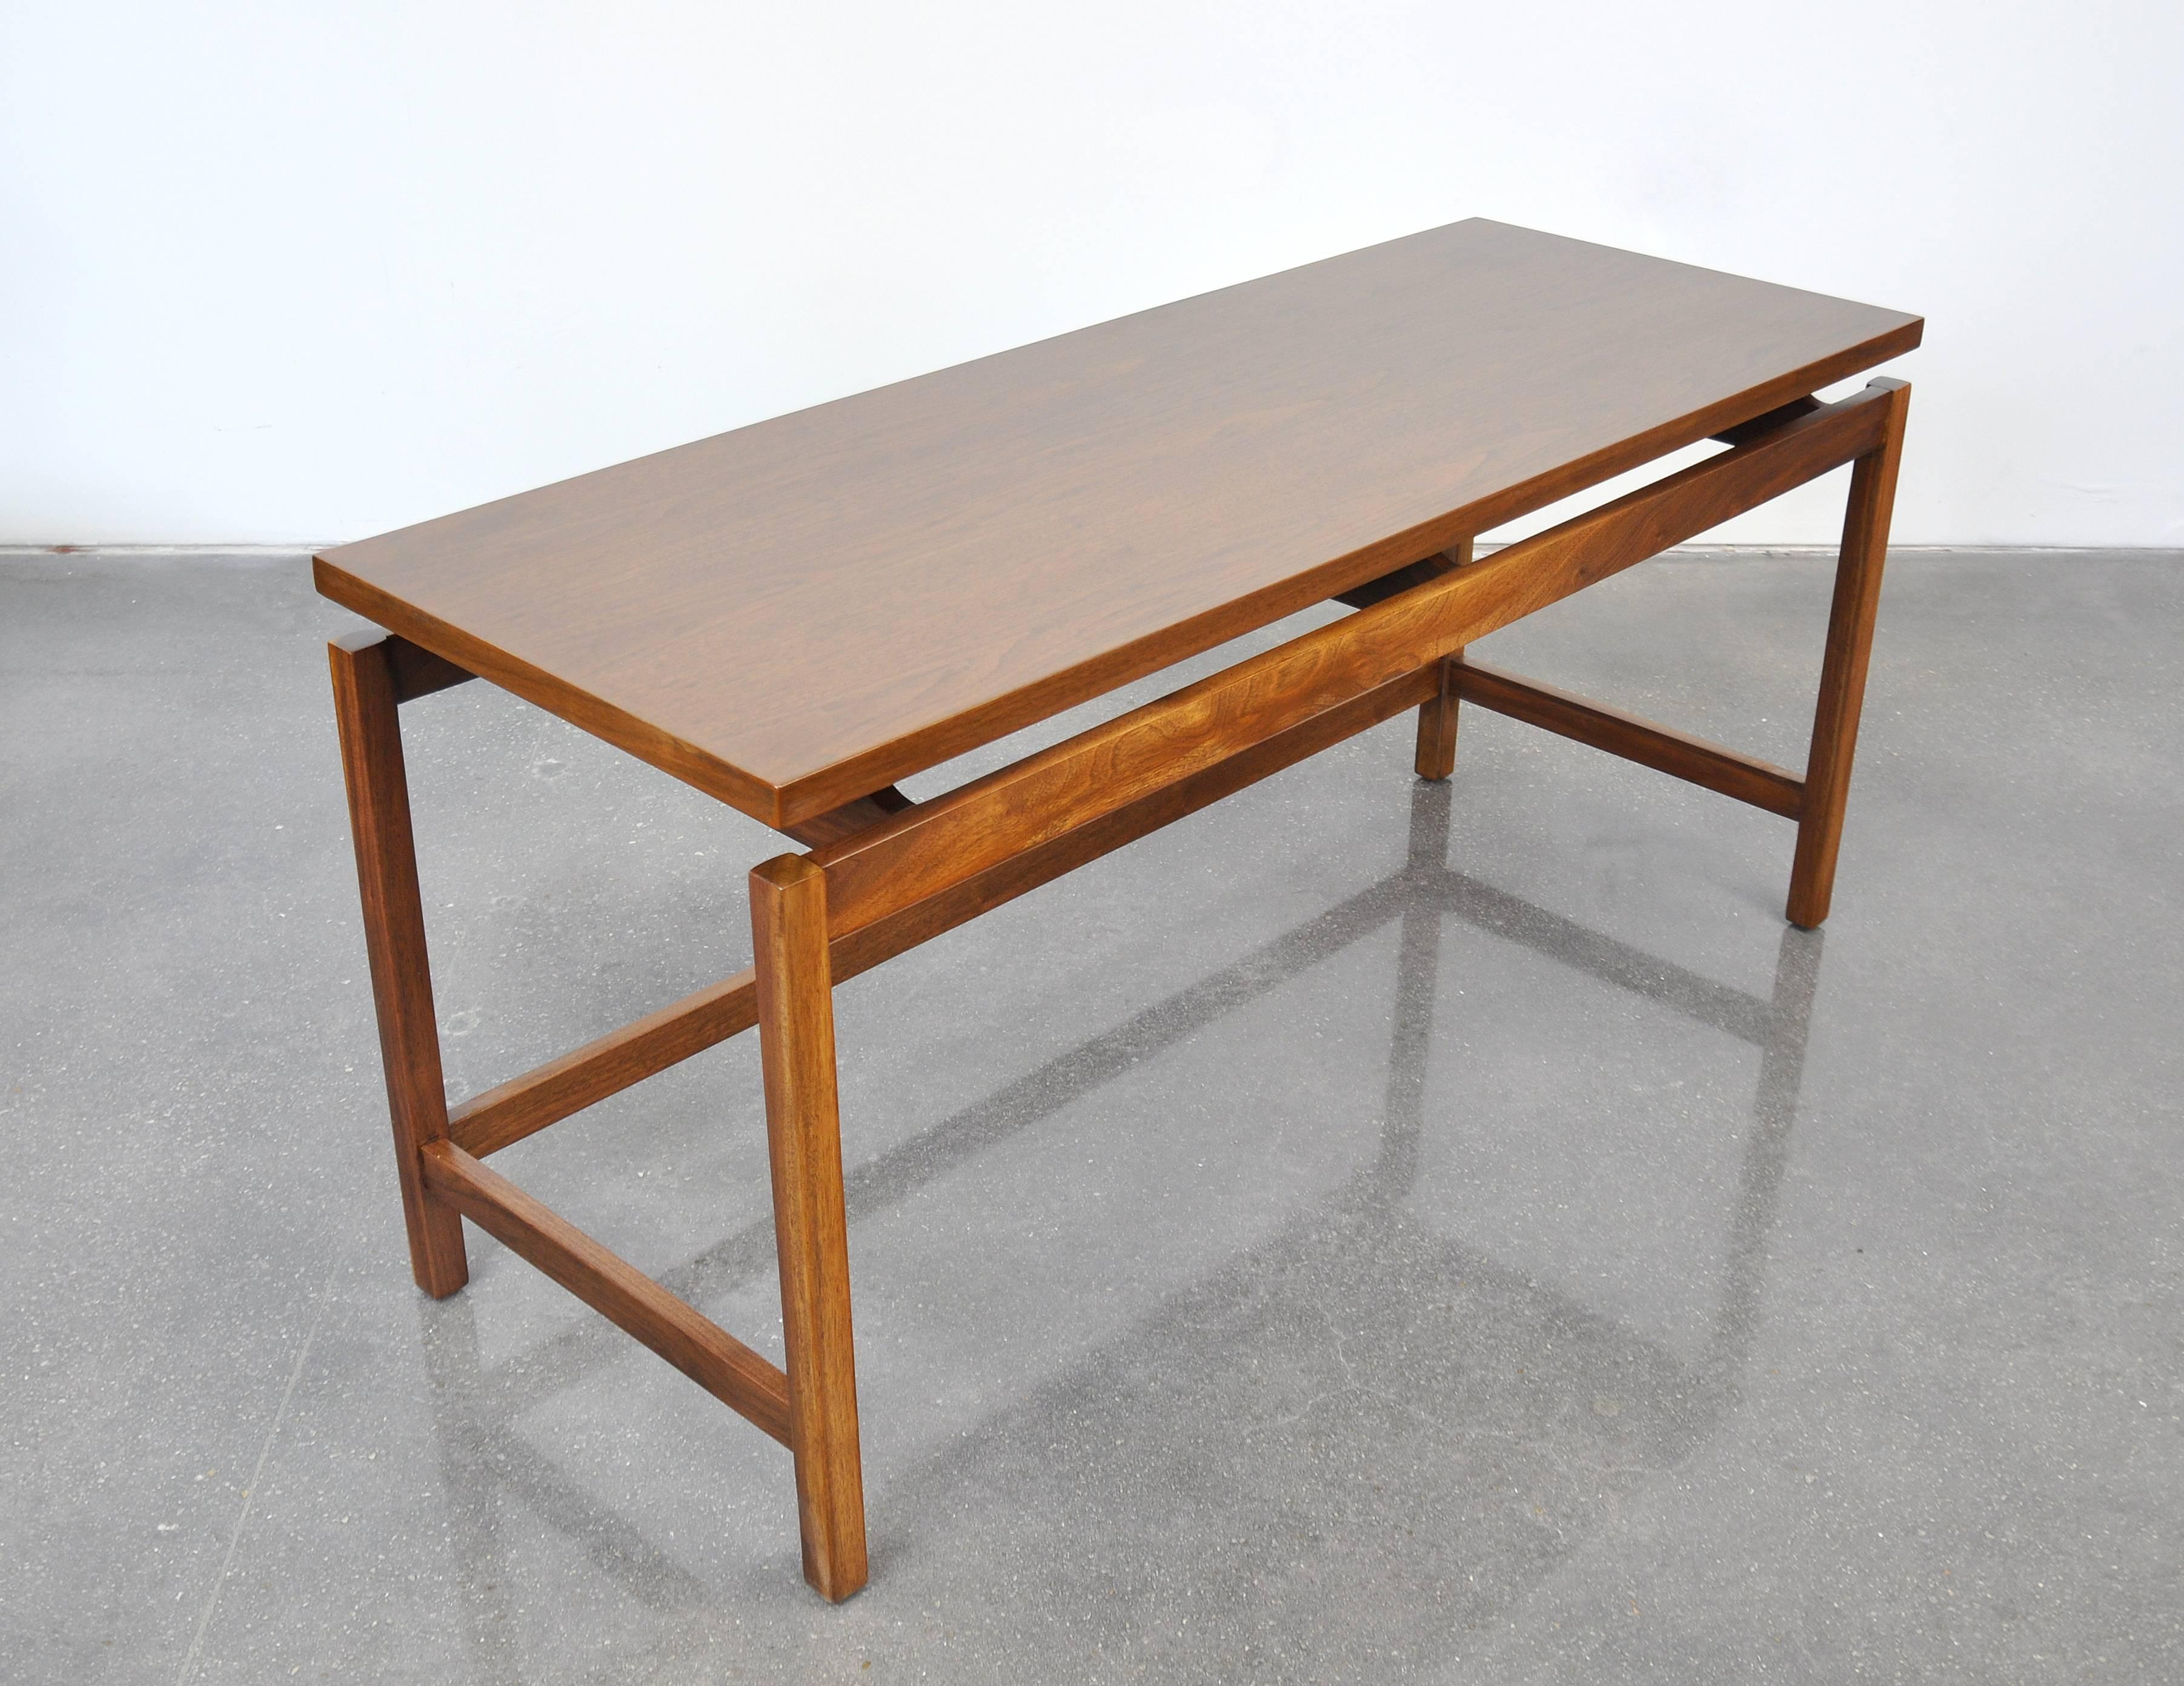 A vintage midcentury Danish modern walnut console, designed by Jens Risom, dating from the 1960s. The low table features a Minimalist design with floating top typical of Risom, allowing it to be placed in virtually any decor or setting, for either